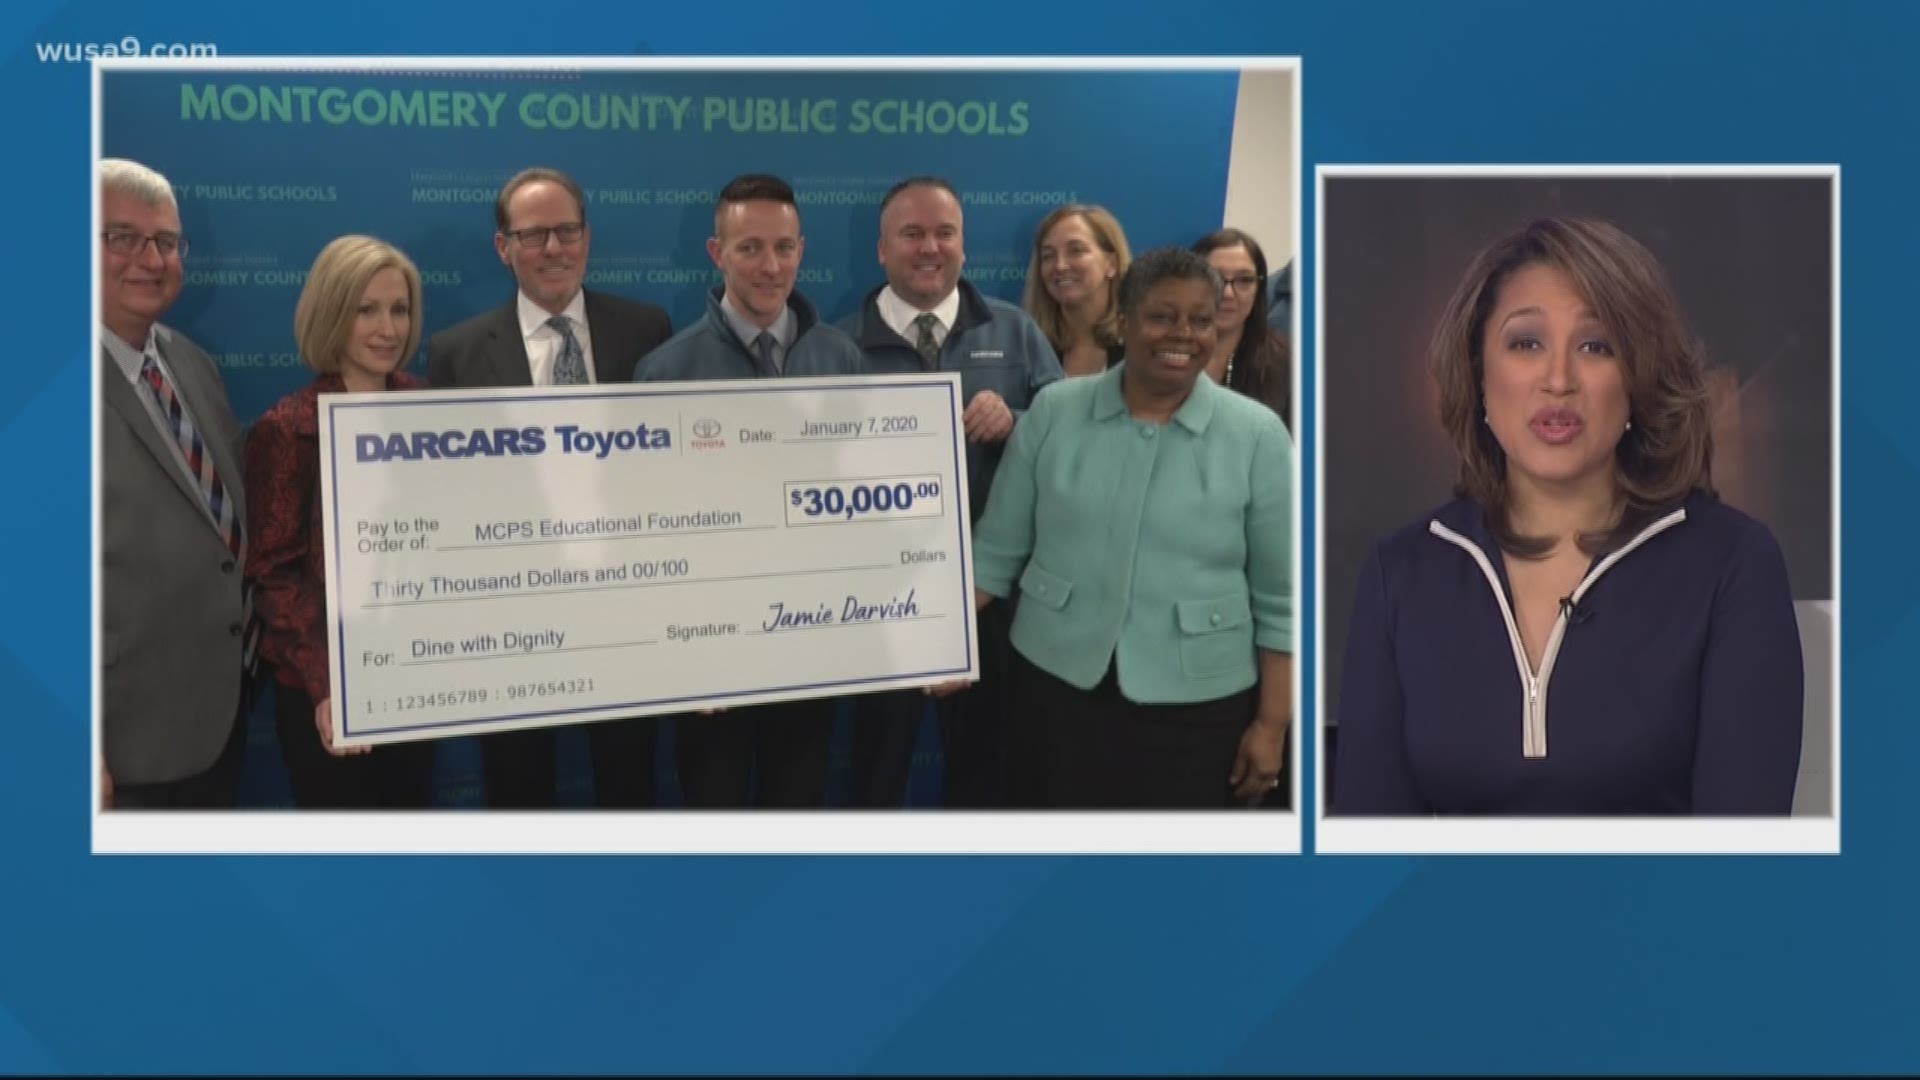 The donation from DARSCARS Automotive Group comes just one month after the group paid off the lunch debt of Prince George's County Public Schools.